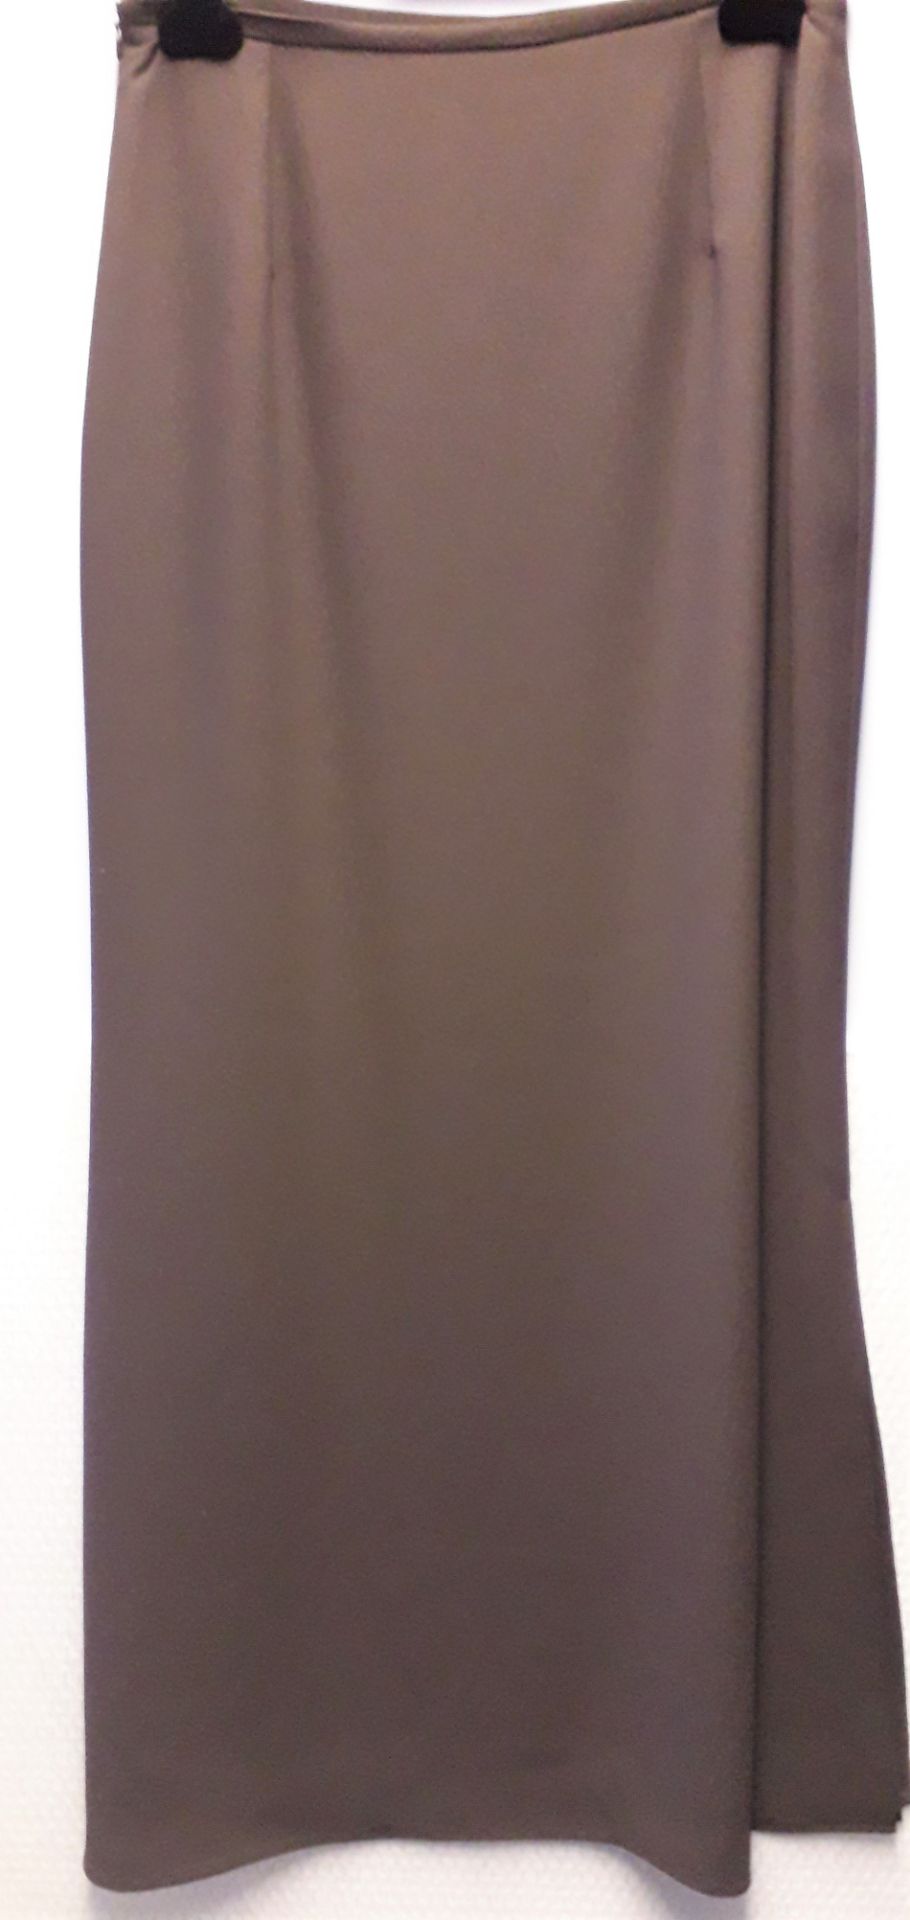 1 x Anne Belin Rich Brown Longer Length Skirt - Size: 16 - Material: 100% Polyester - From a High